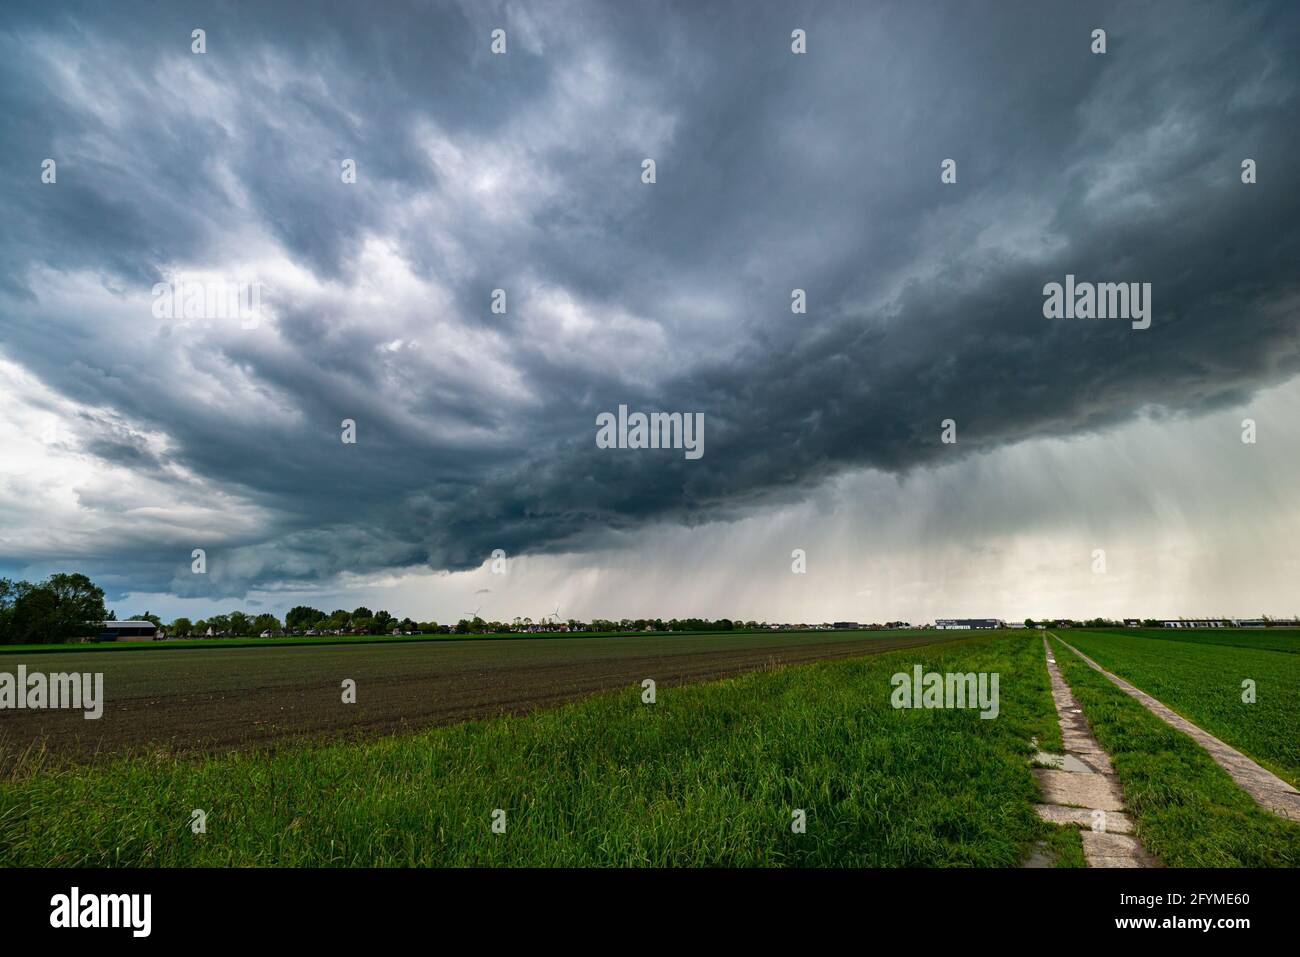 Thunderstorm with developing arcus or shelf cloud over the Dutch countryside Stock Photo